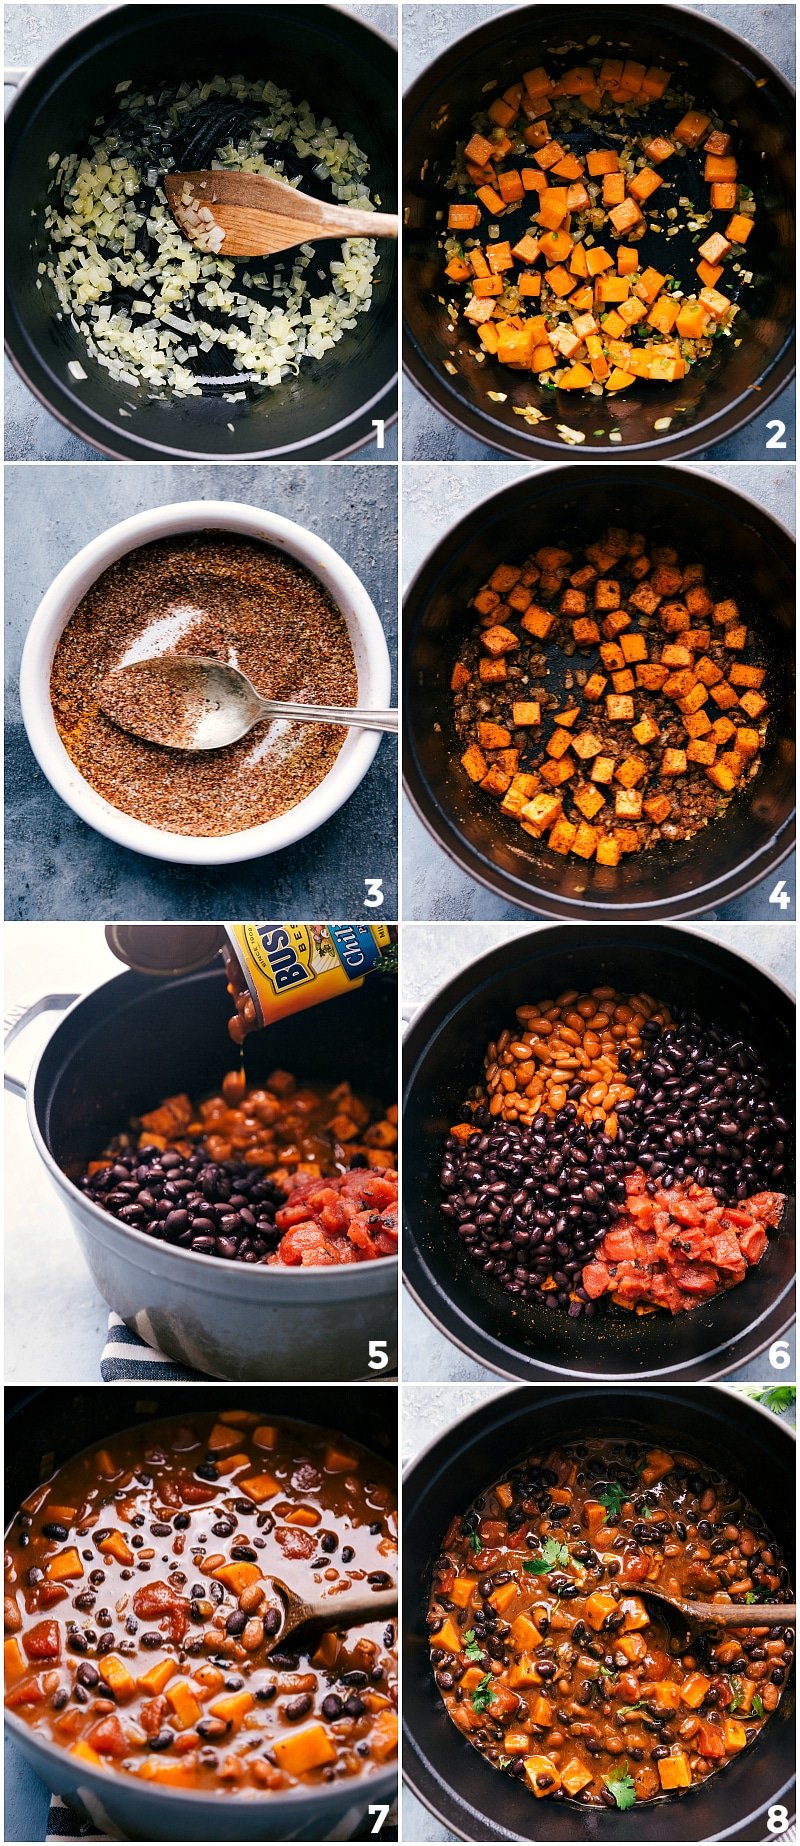 Process shots of making Sweet Potato Black Bean Chili: browning the onion; adding sweet potatoes; combining the seasonings; mixing seasonings in; adding beans and diced tomatoes; simmering; serve when fully thickened and tender.